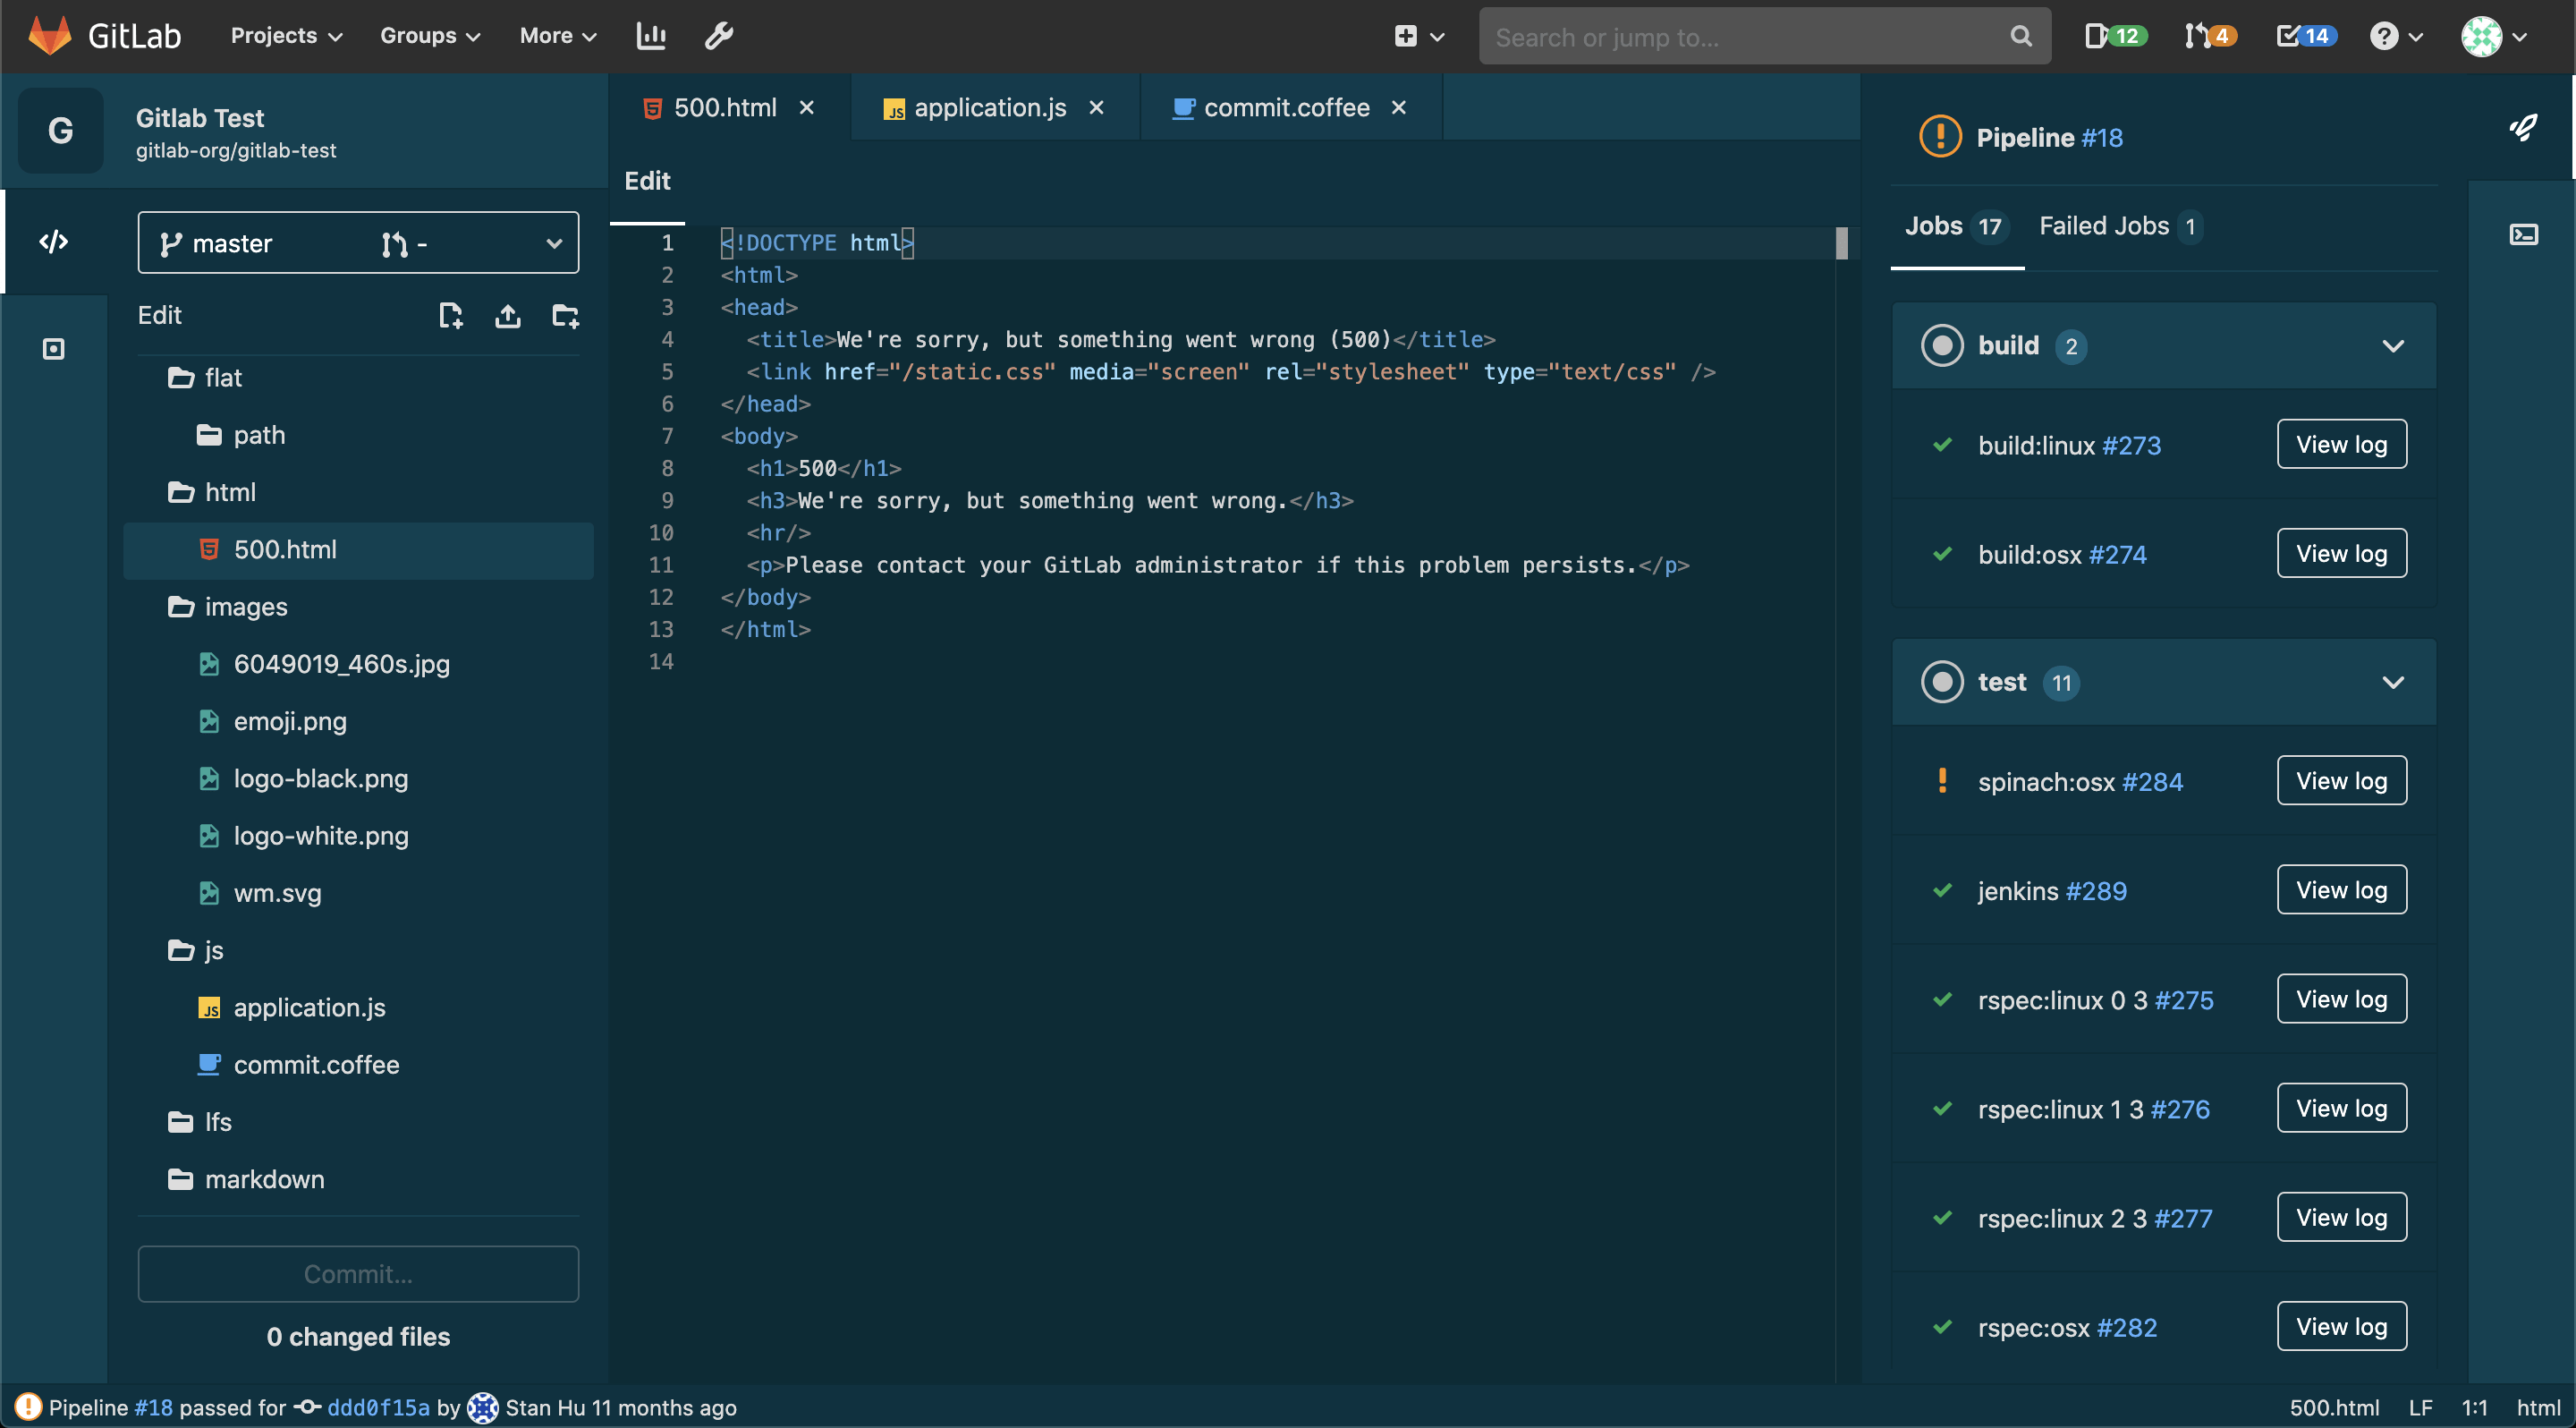 doc/user/project/web_ide/img/solarized_dark_theme_v13_1.png